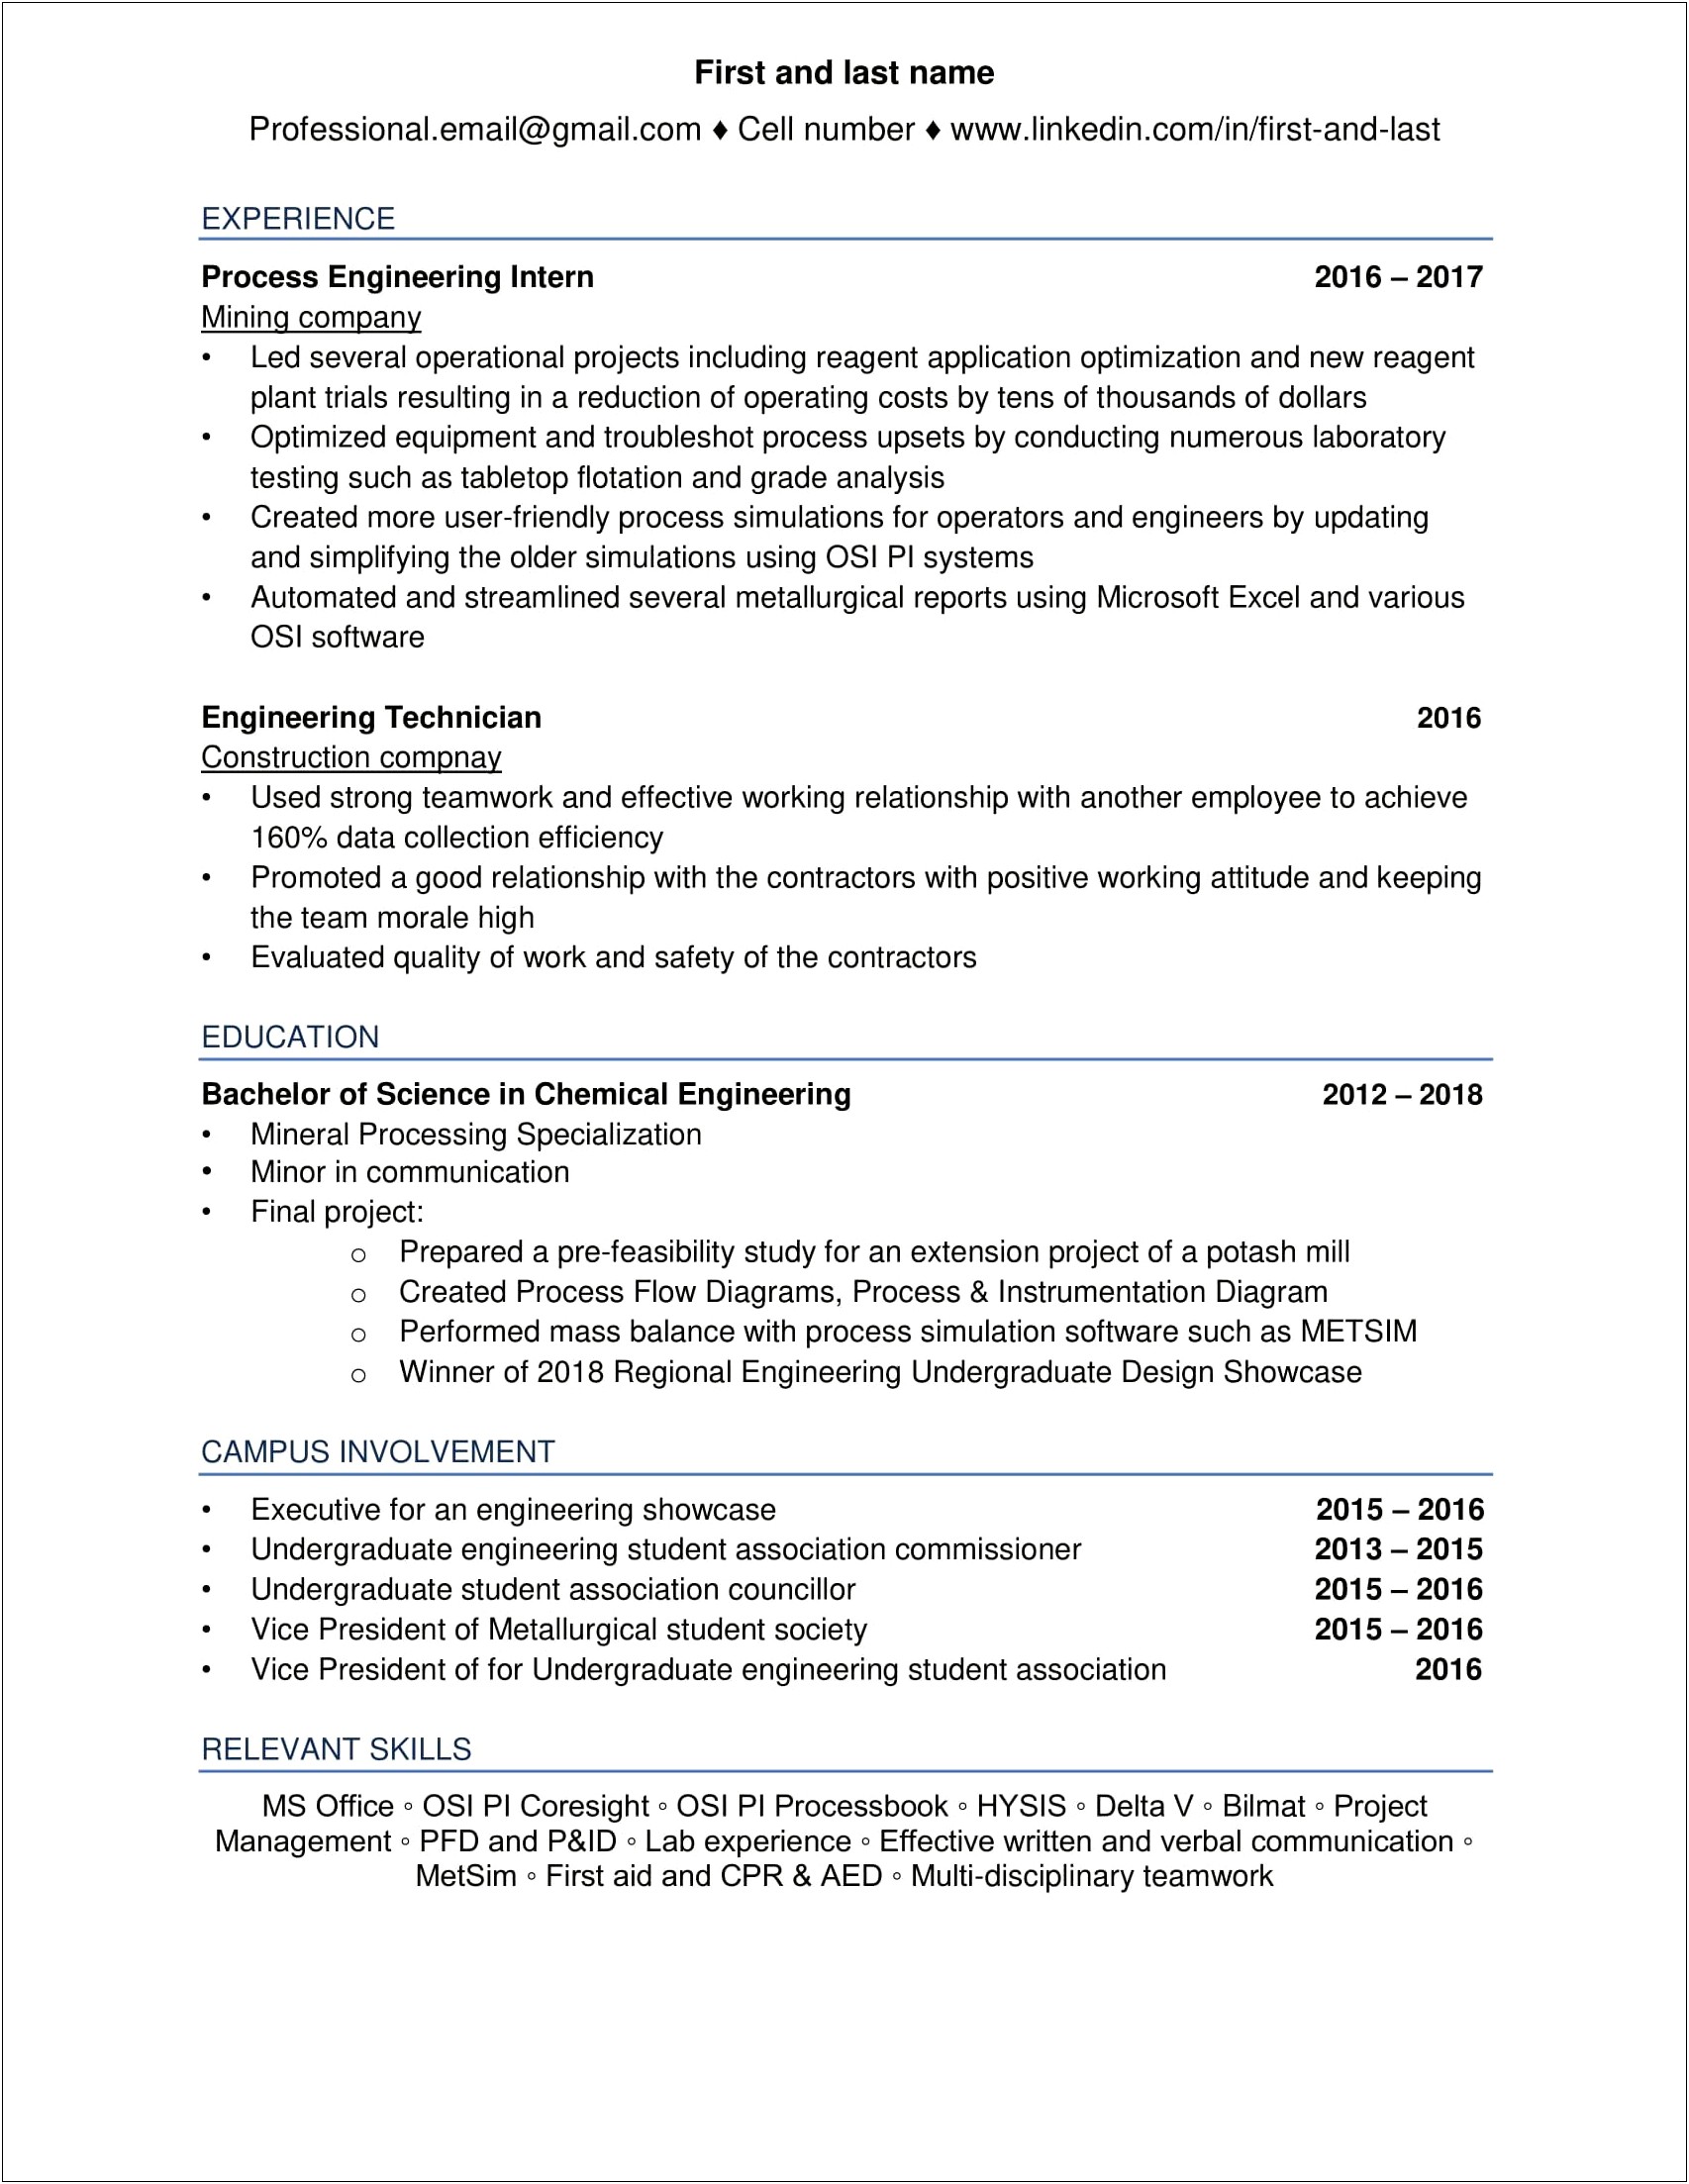 Resume Sample For Chemical Engineering Student